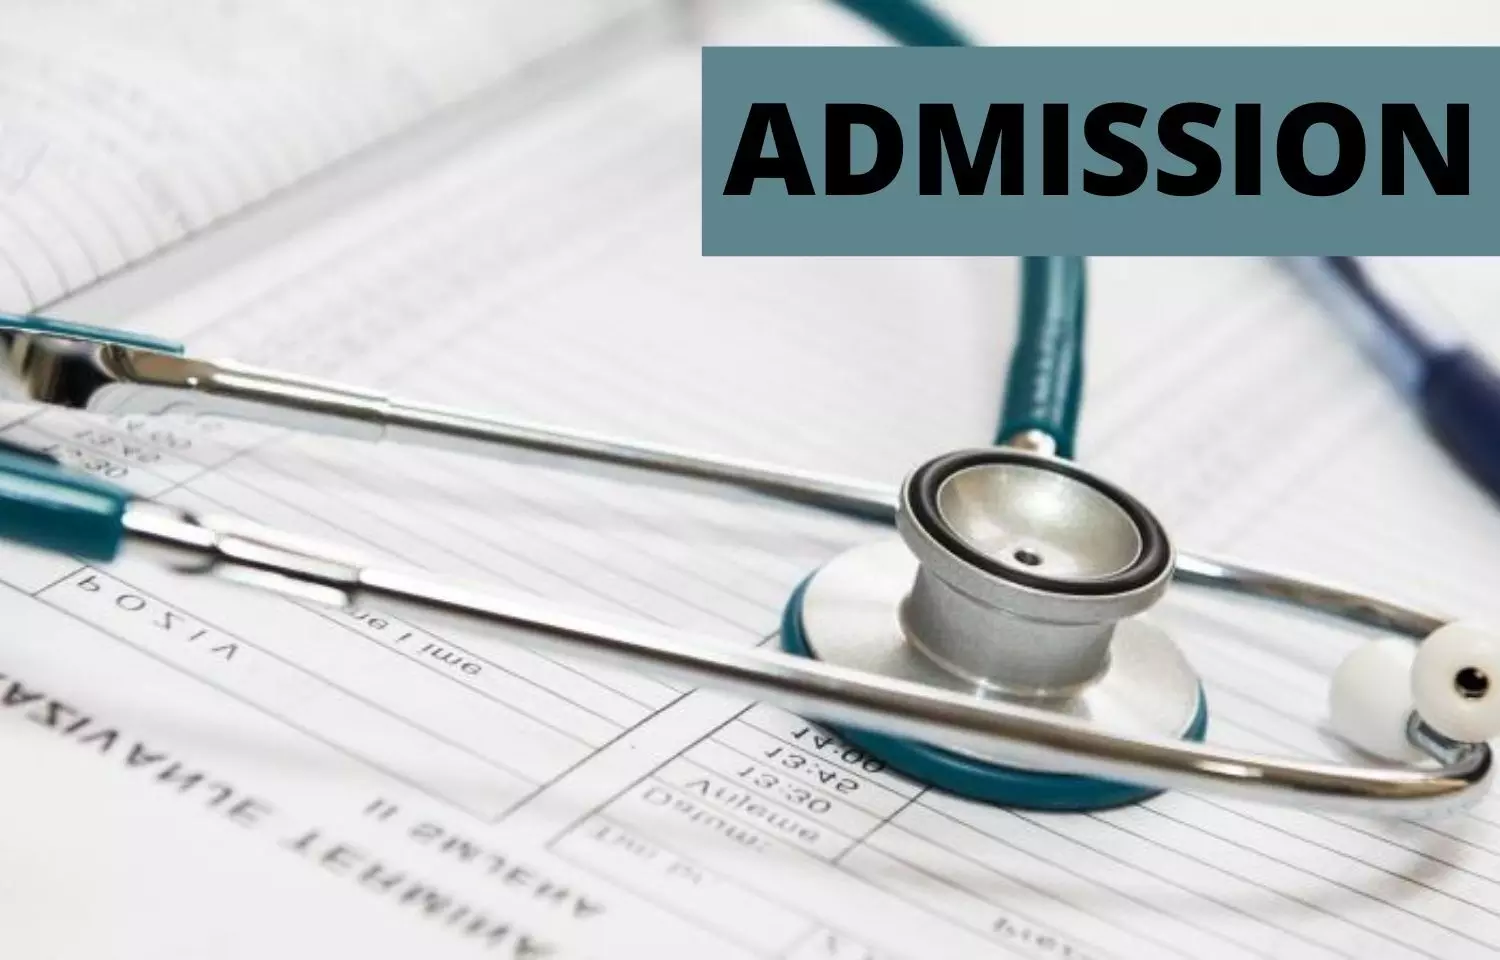 AIIMS Rishikesh invites applications for DM, MCh January 2022, View schedule, eligibility criteria, fee, seat details here